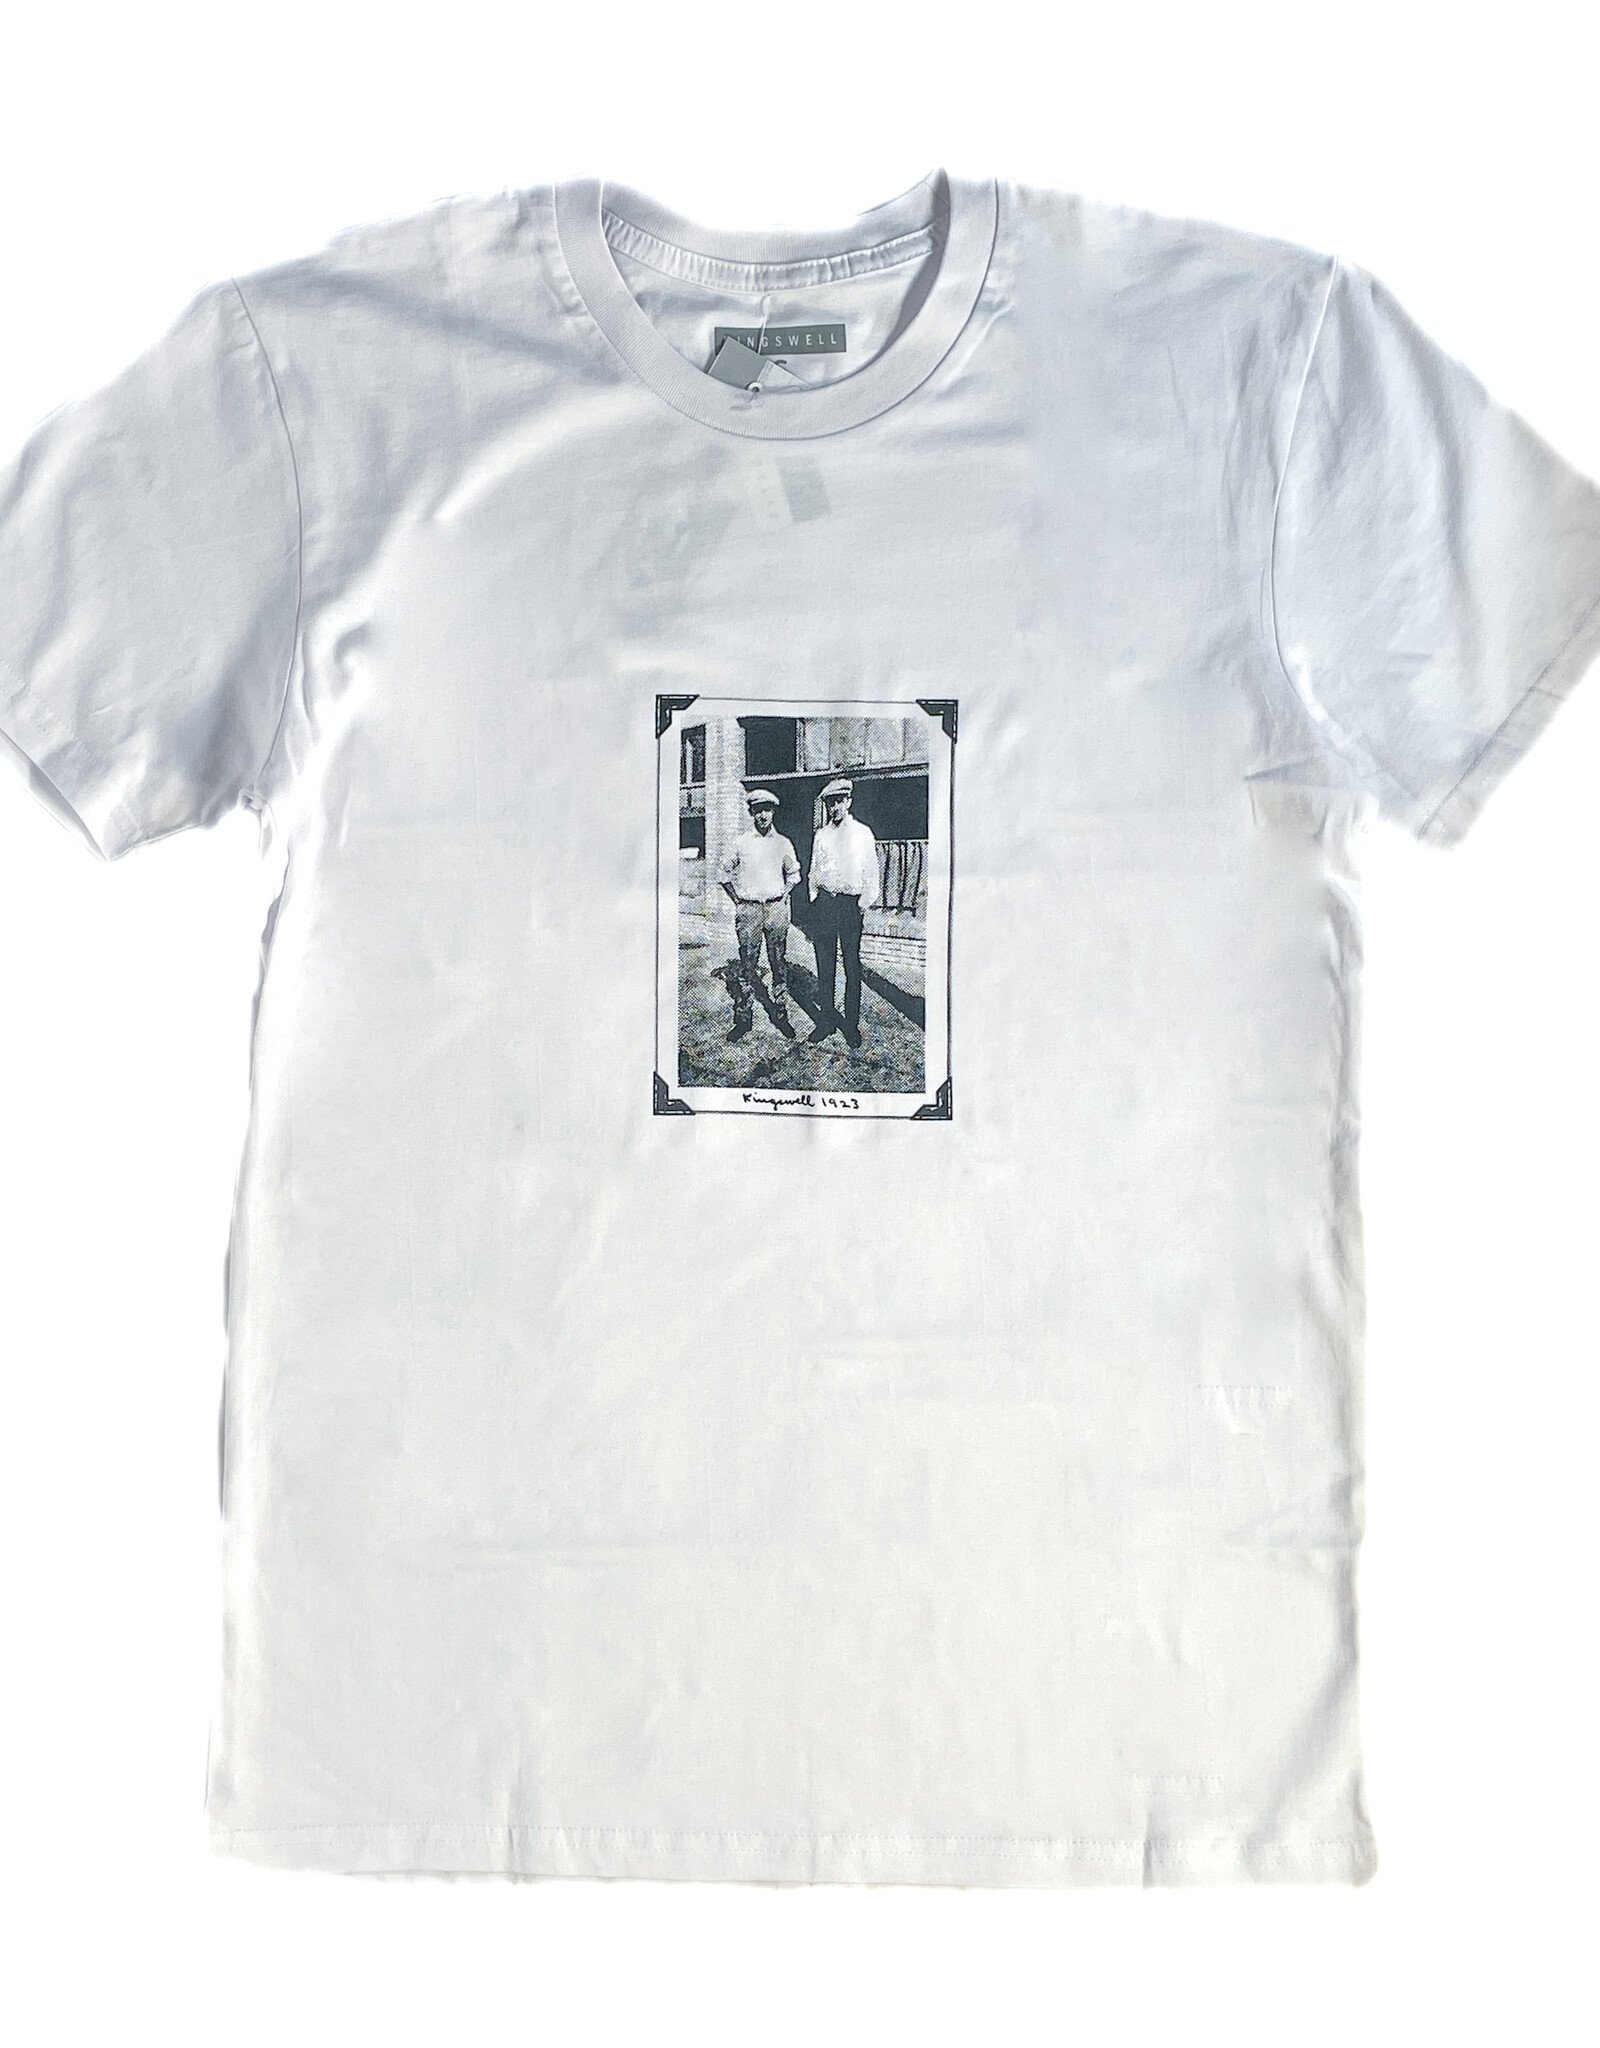 KINGSWELL KINGSWELL YOUTH FOUNDERS TEE - WHITE